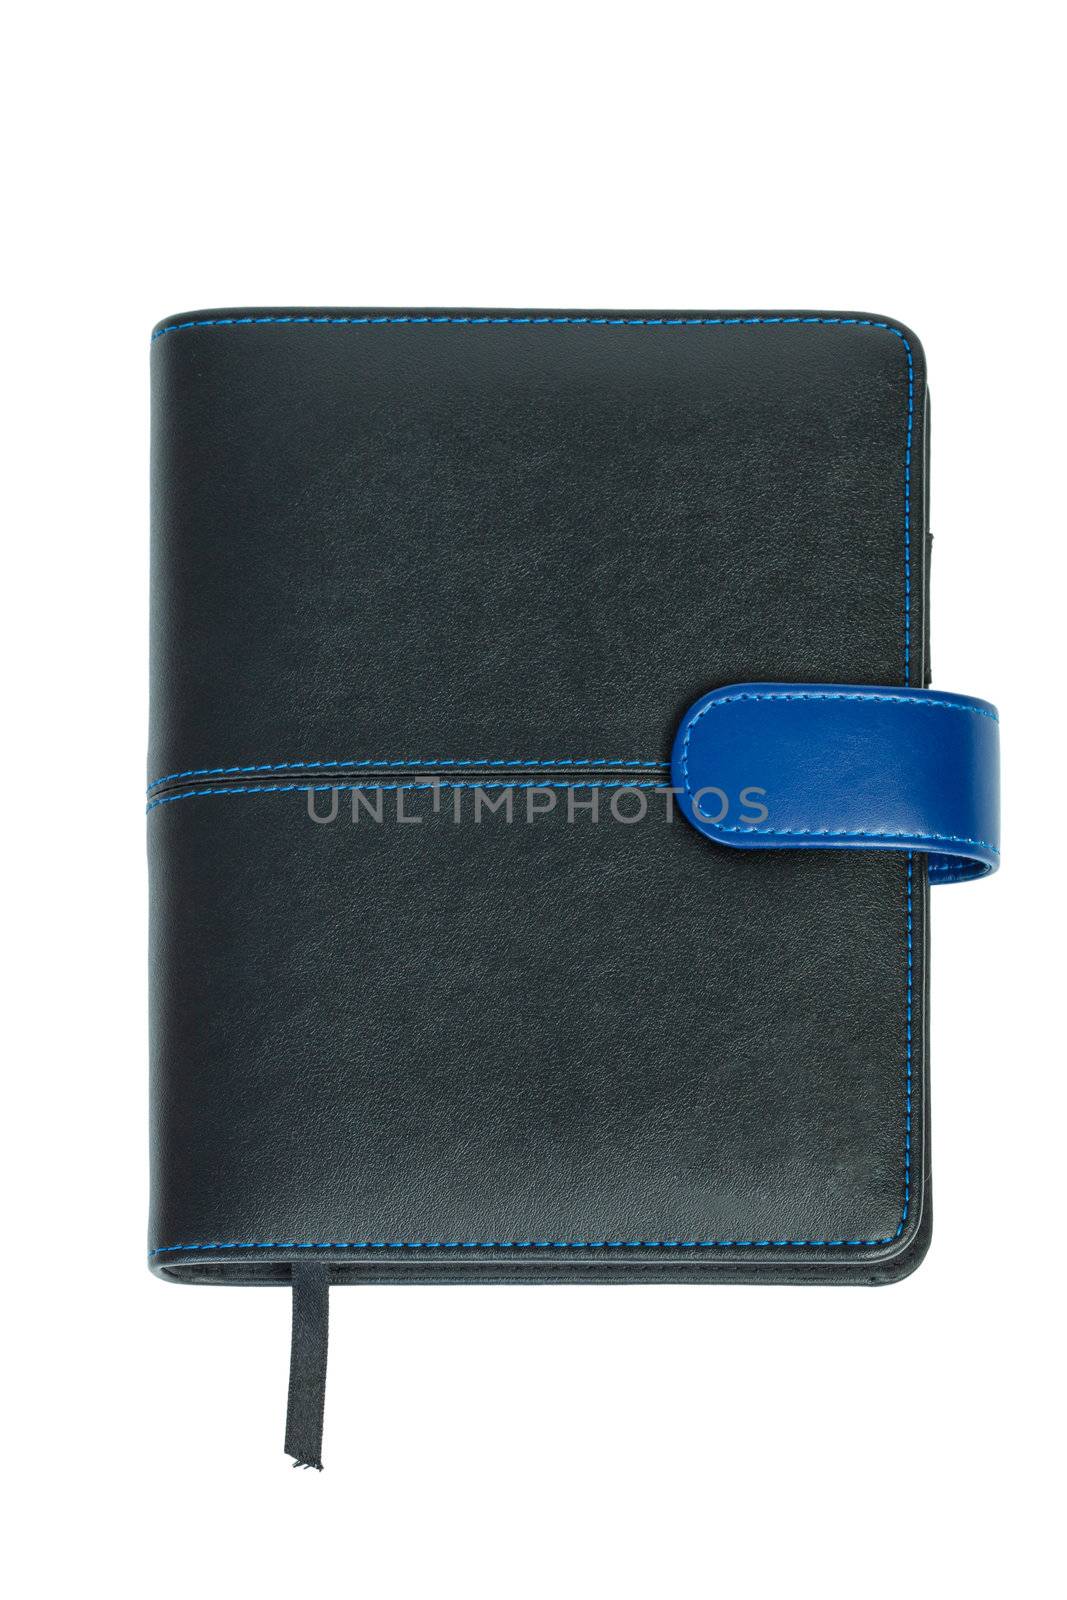 leather cover note book by FrameAngel